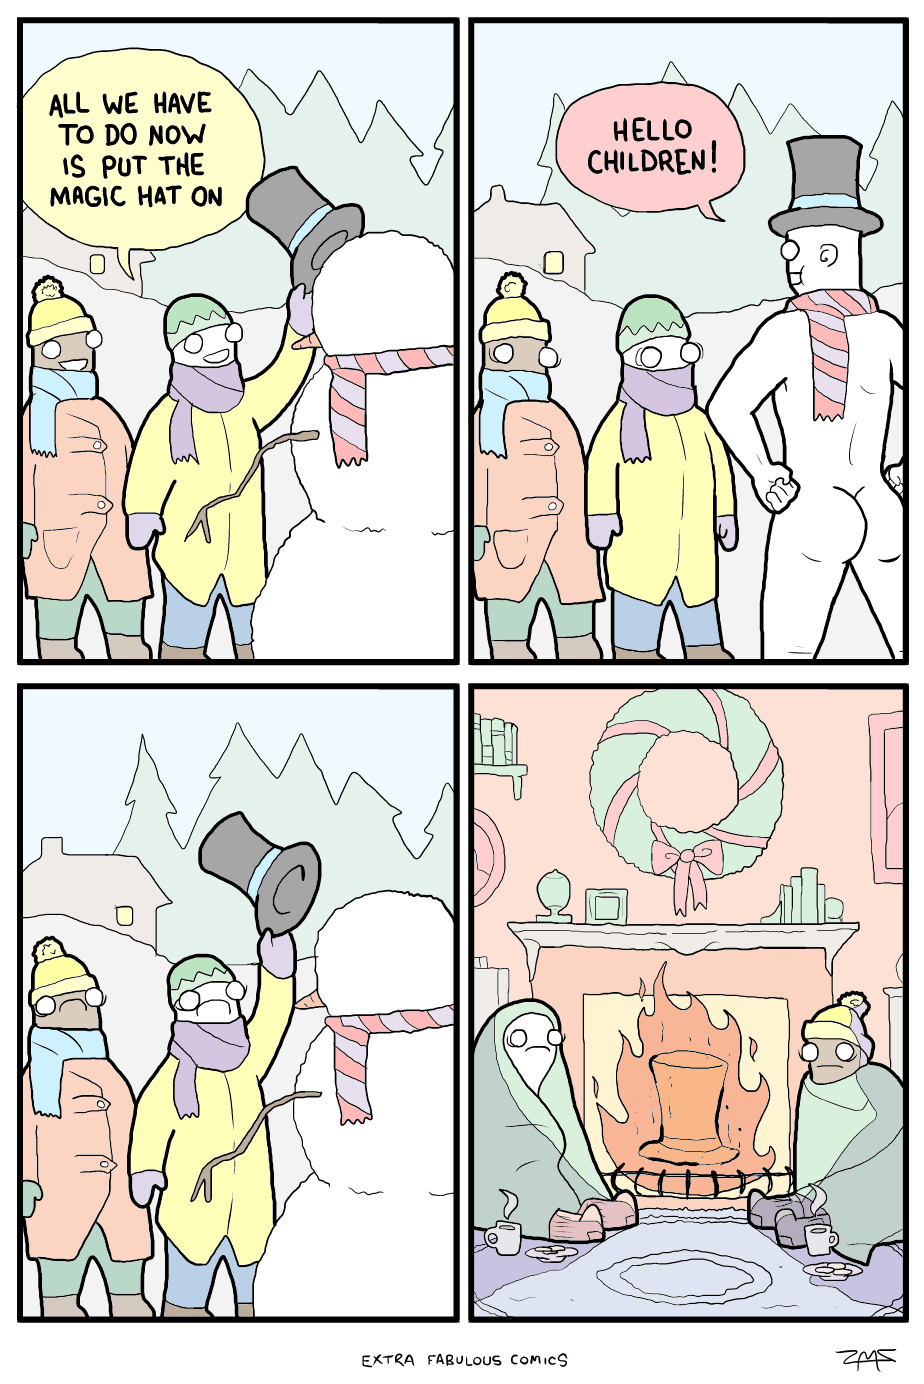 tastefullyoffensive:
“ The Snow Man (comic by Extra Fabulous Comics)
”